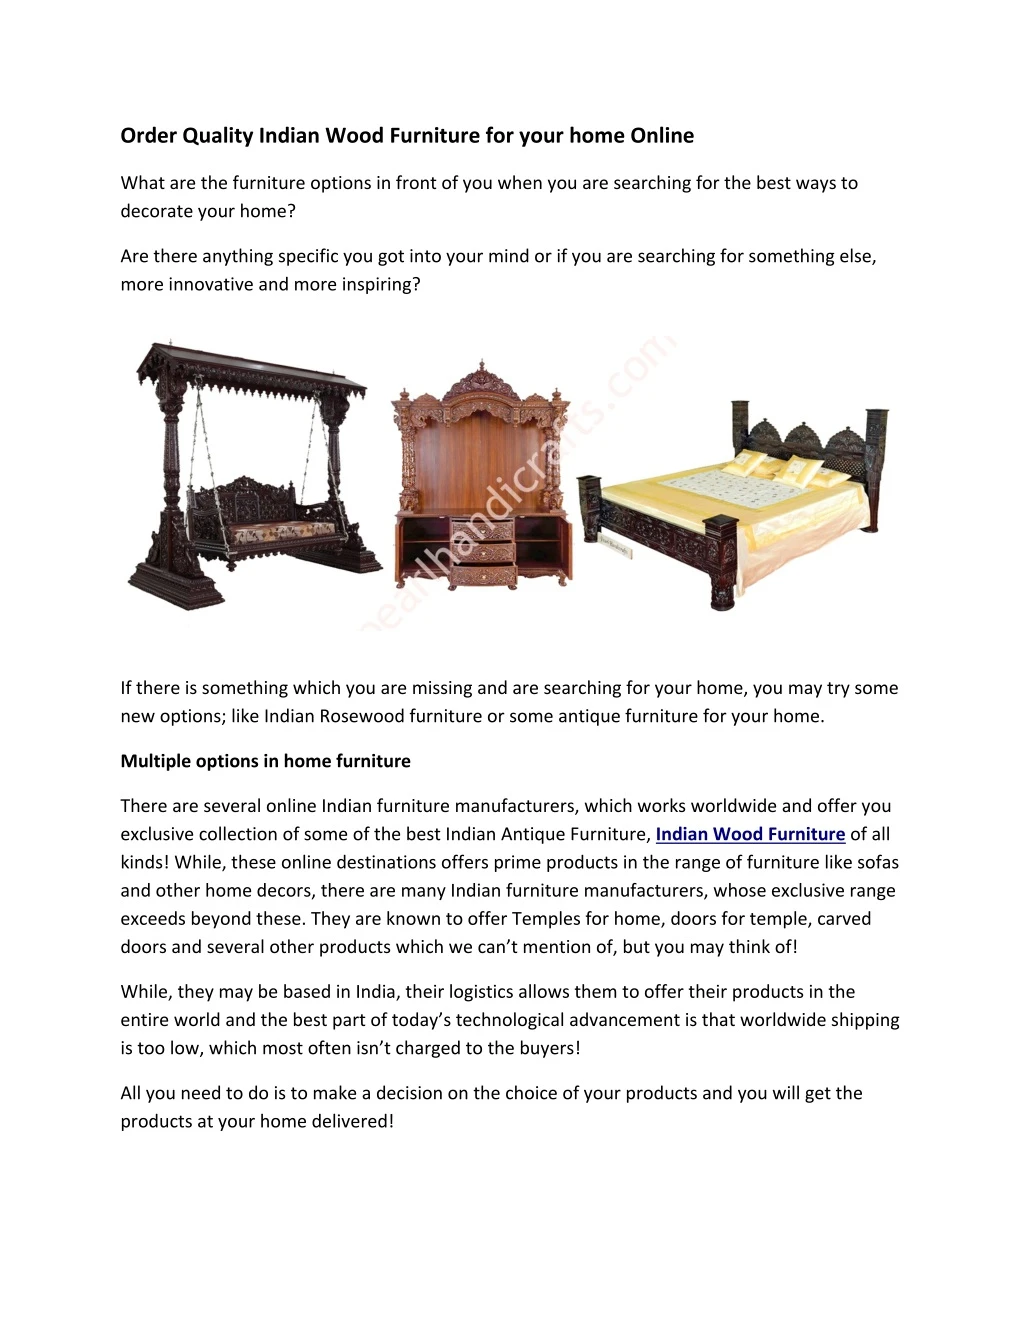 order quality indian wood furniture for your home n.